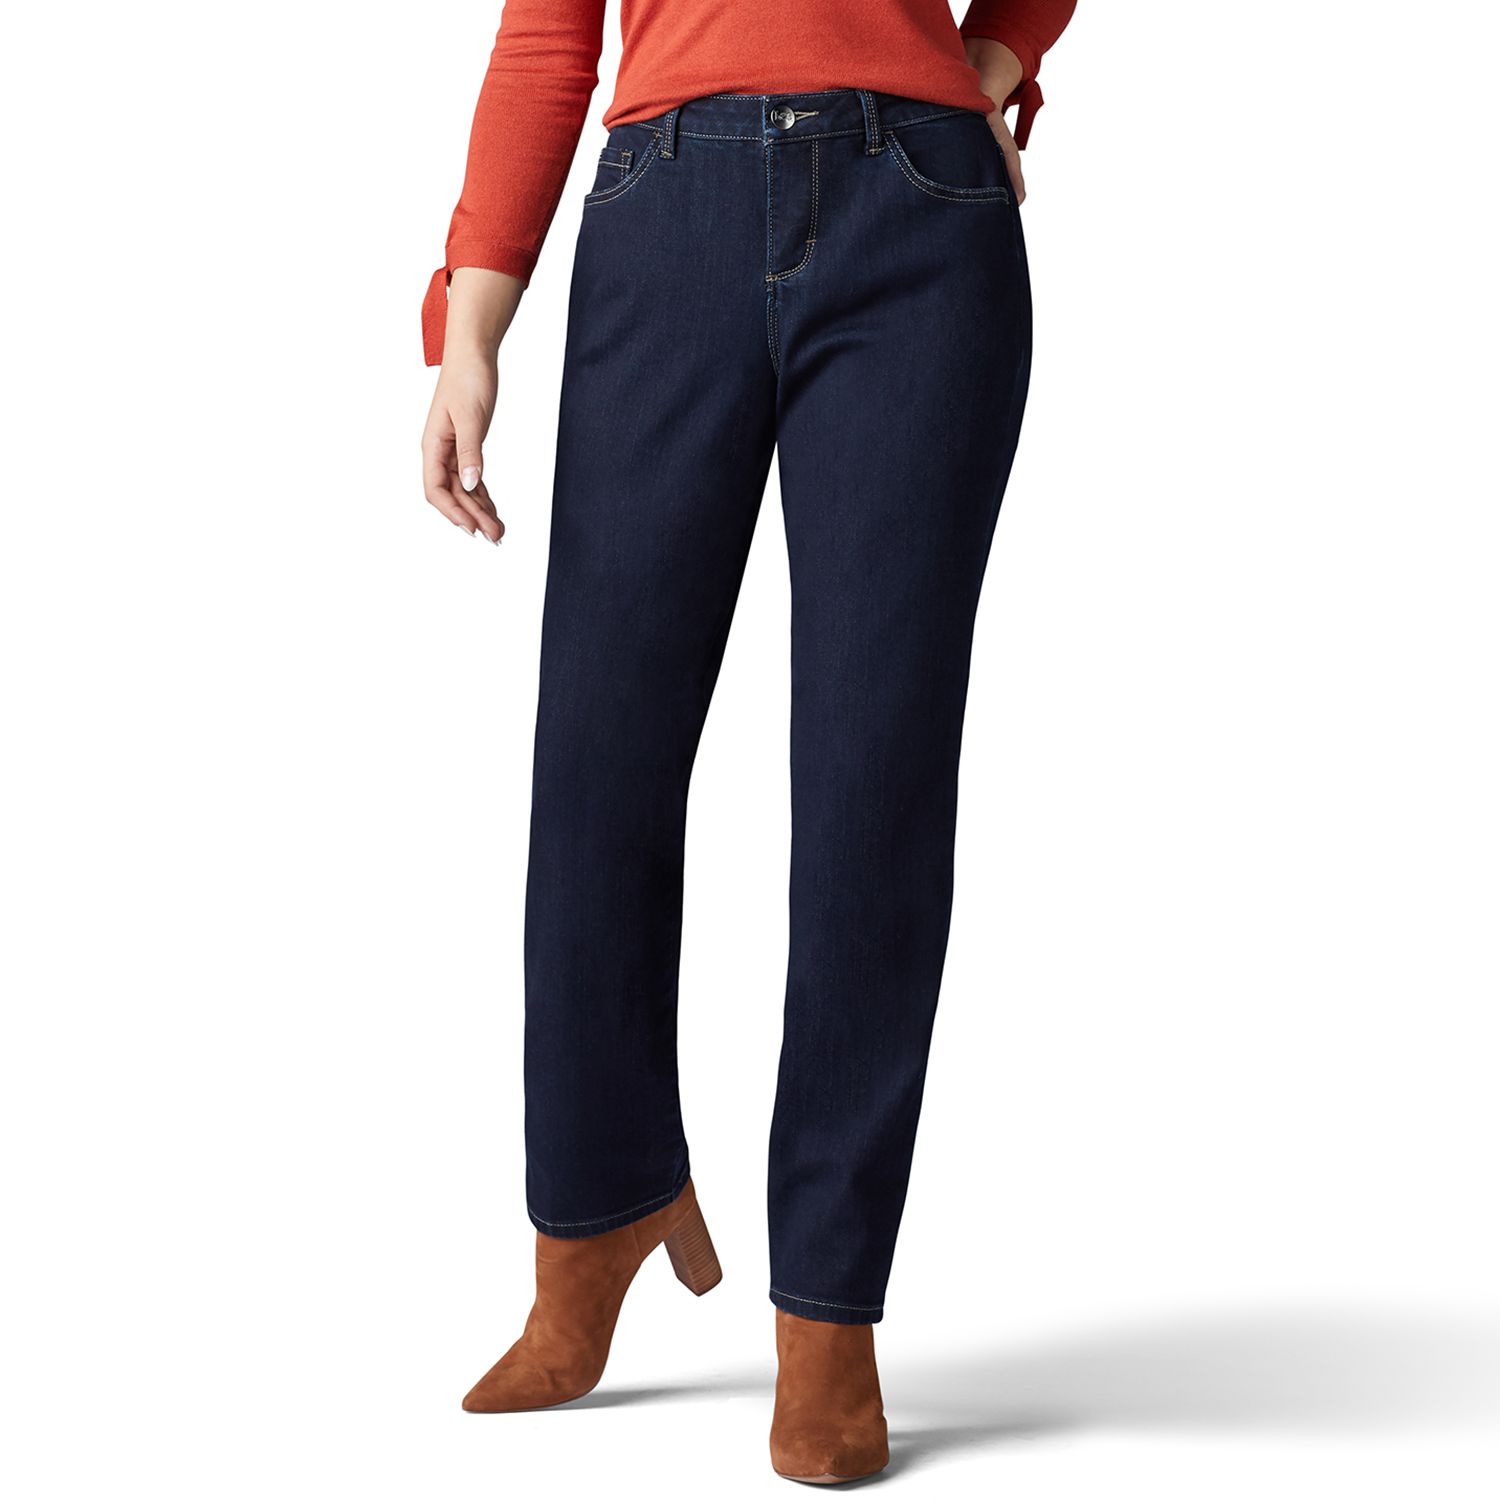 Image for Lee Petite Instantly Slims Straight-Leg Jeans at Kohl's.